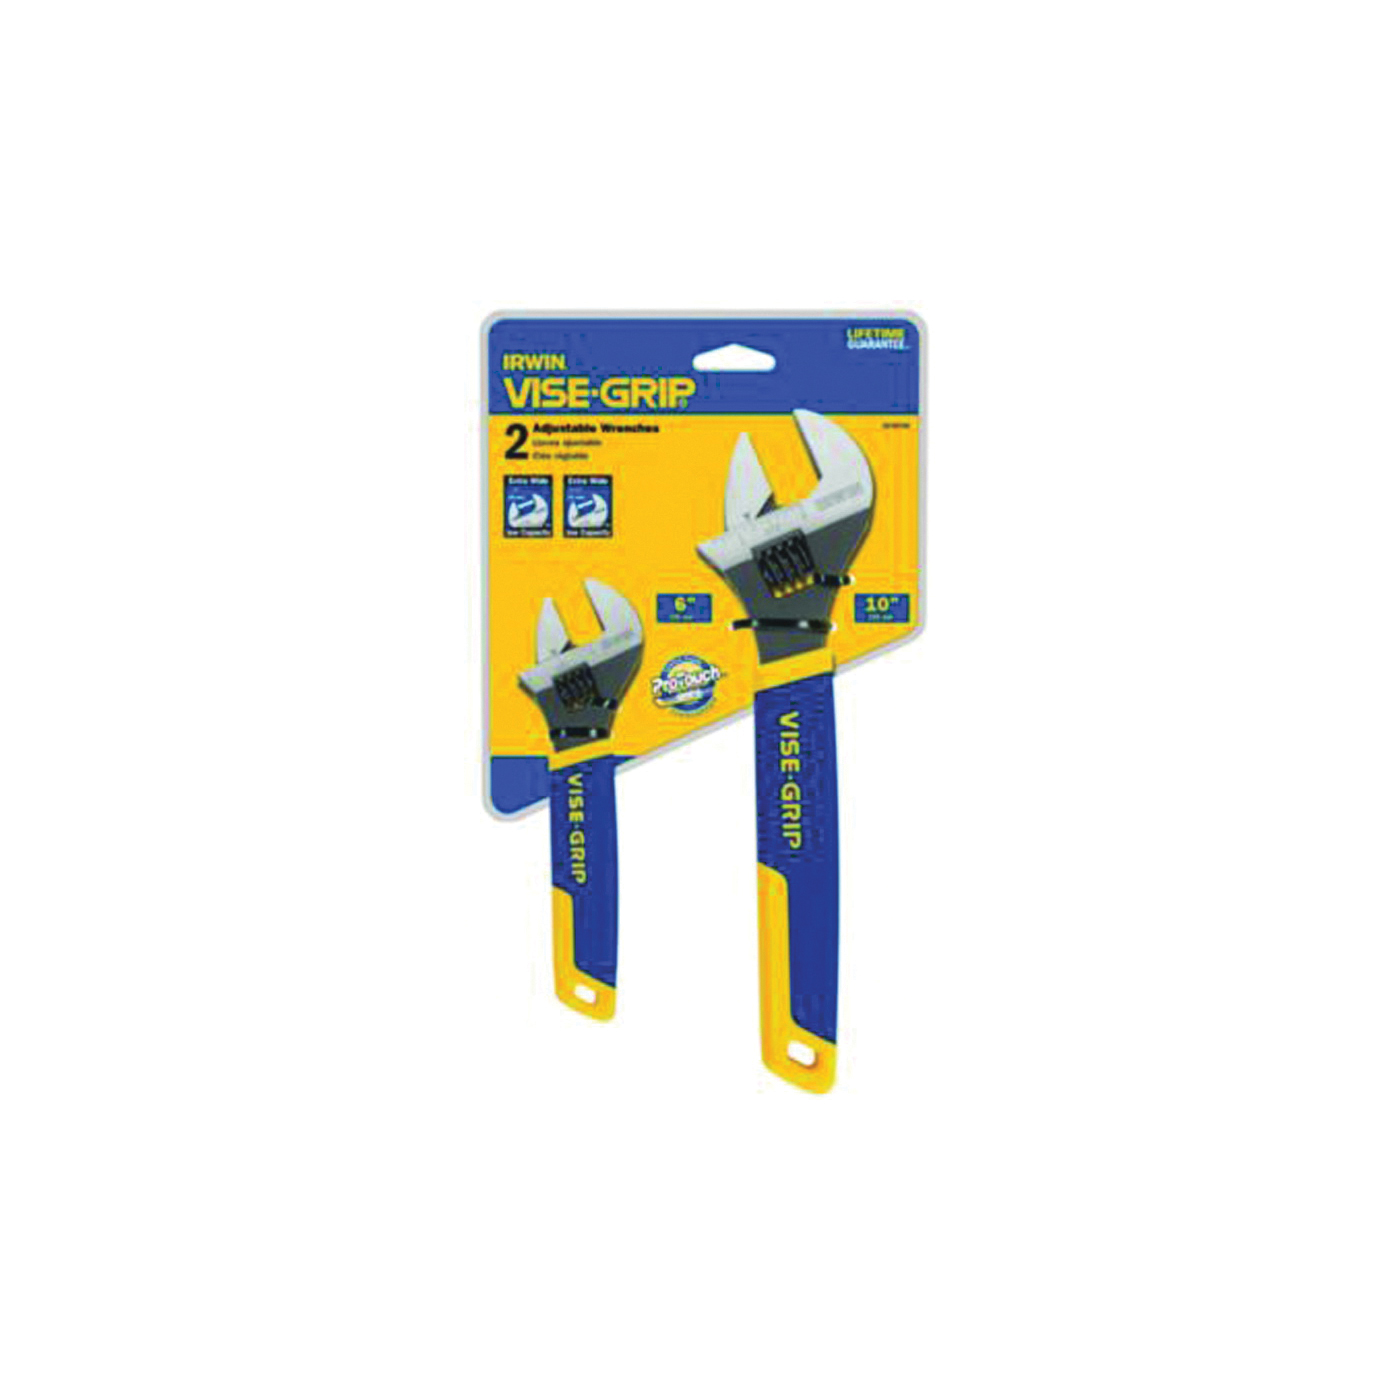 2078700 Adjustable Wrench Set, ProTouch Grip Handle